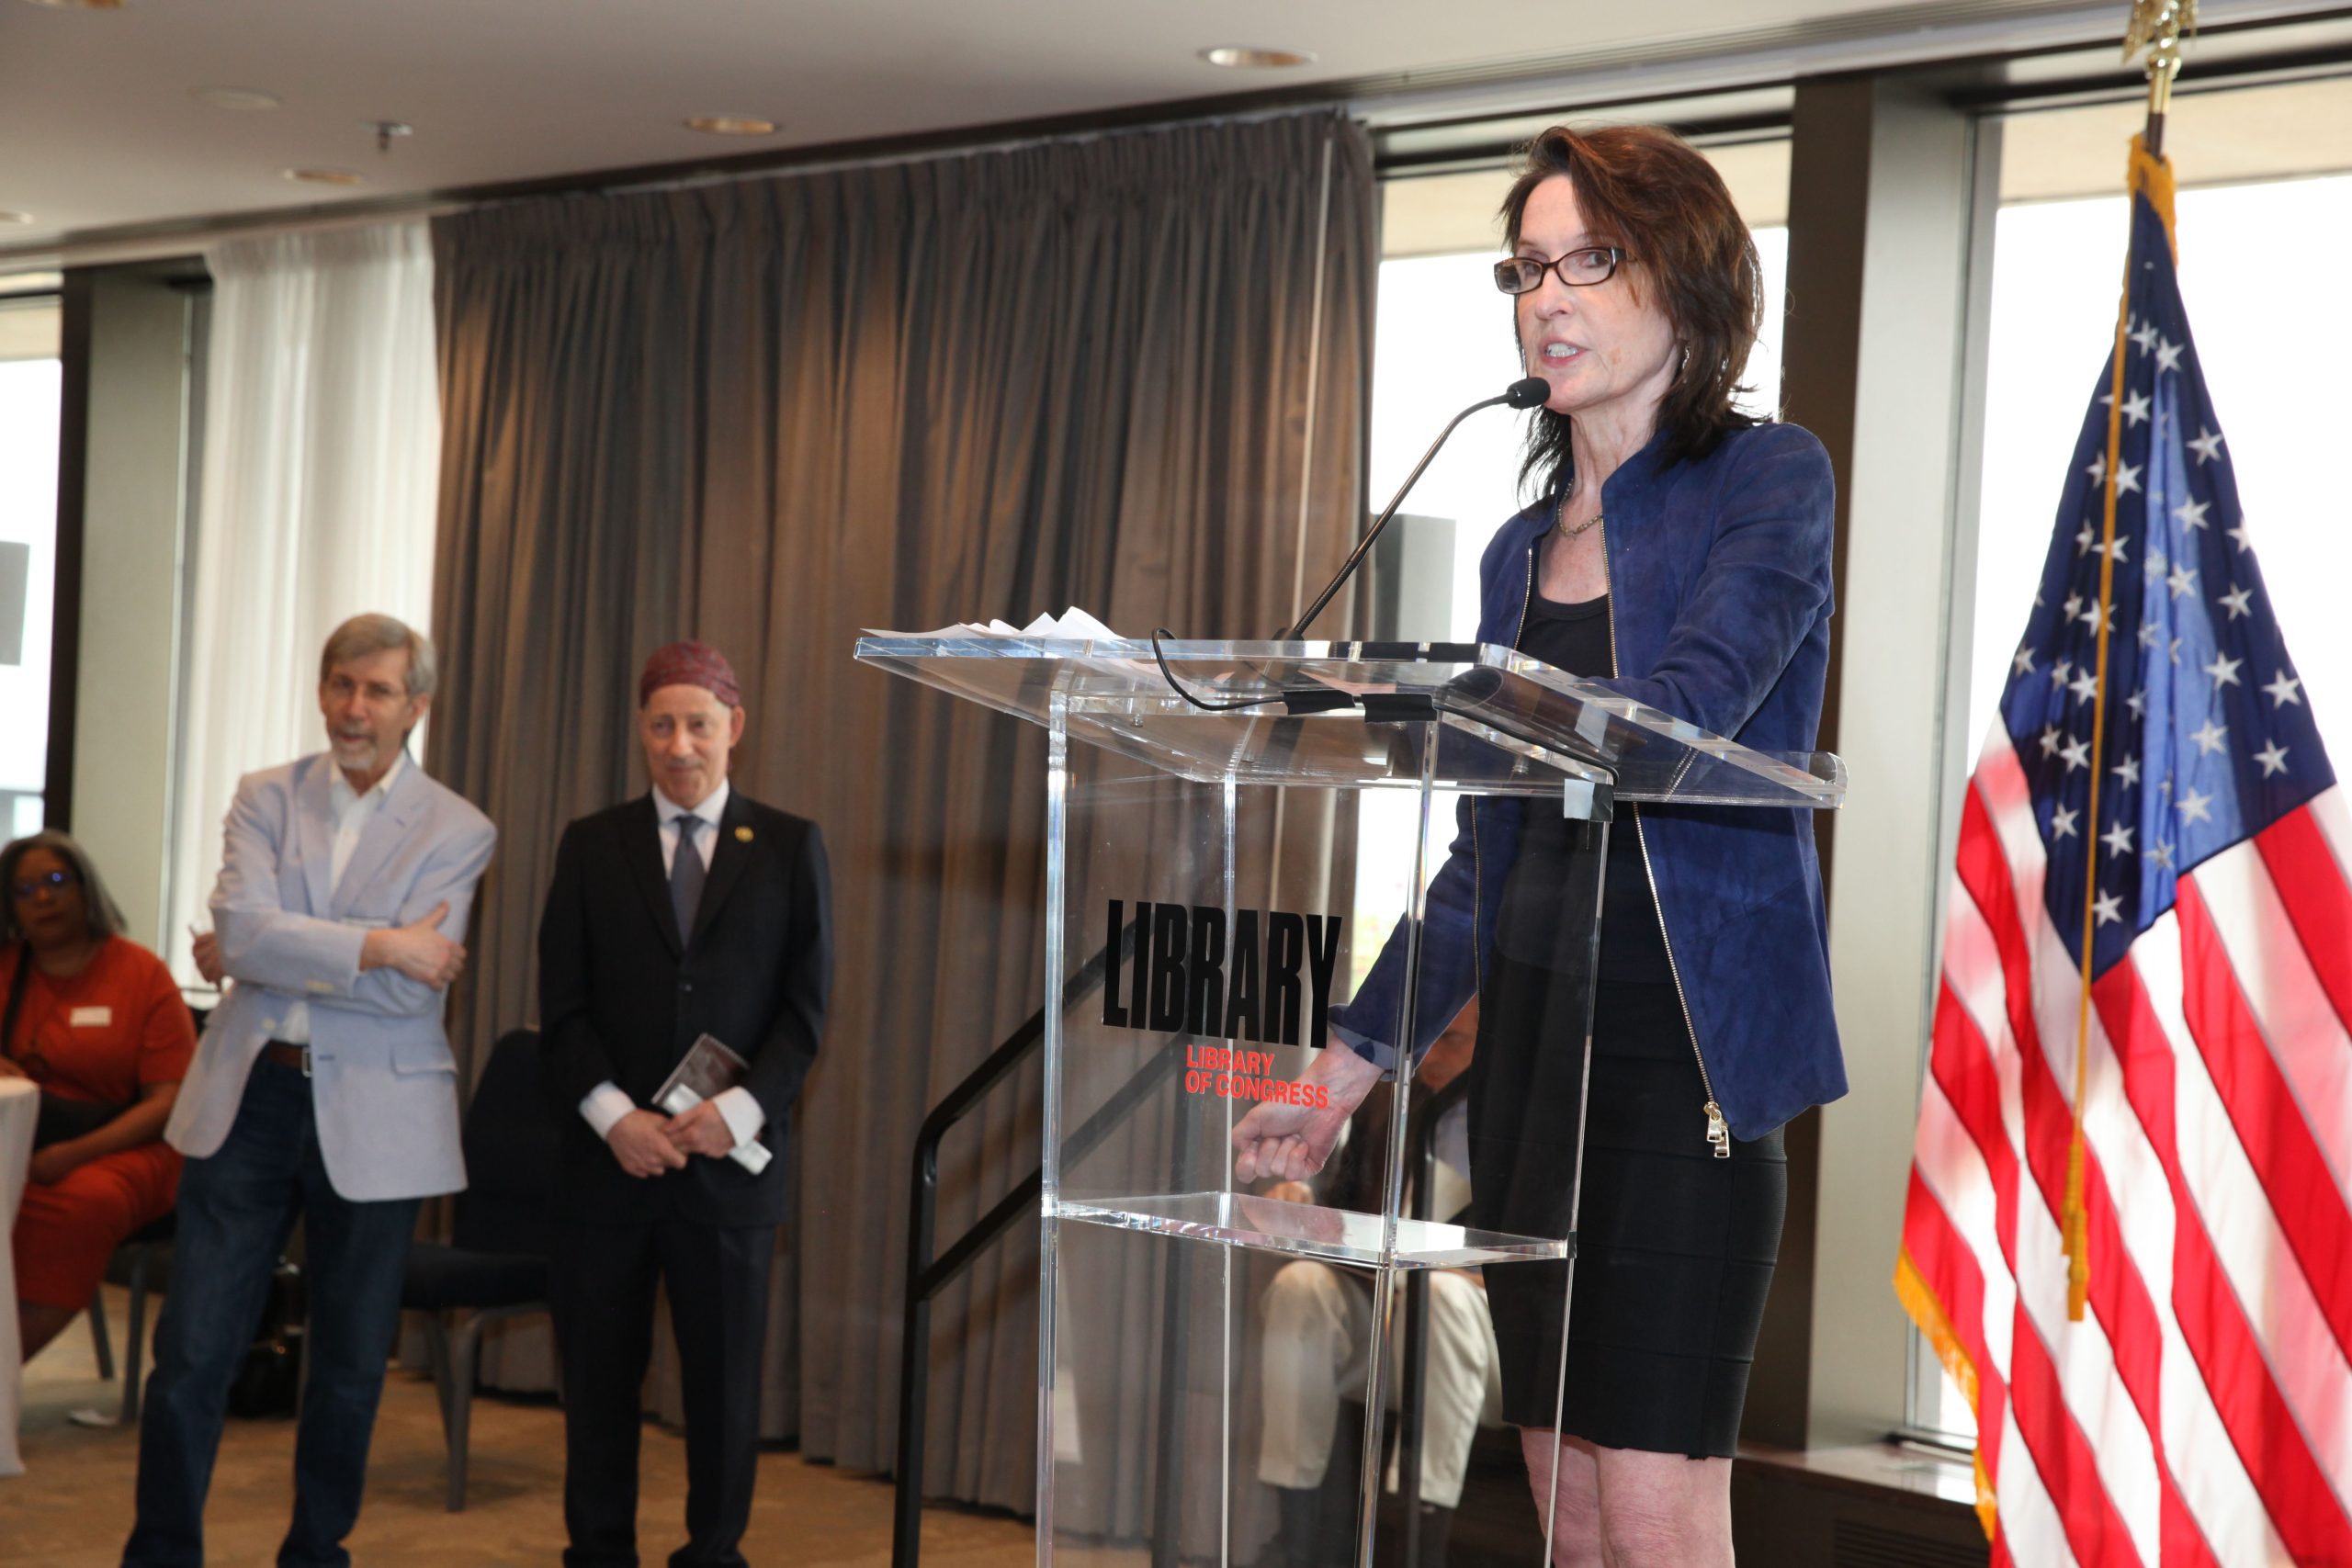 Katrina vanden Heuvel accepts the 2023 Marc Raskin Award for Civic and Intellectual Courage. IPS Senior Adviser John Cavanagh (left) and Rep. Jamie Raskin (right) look on in the background.